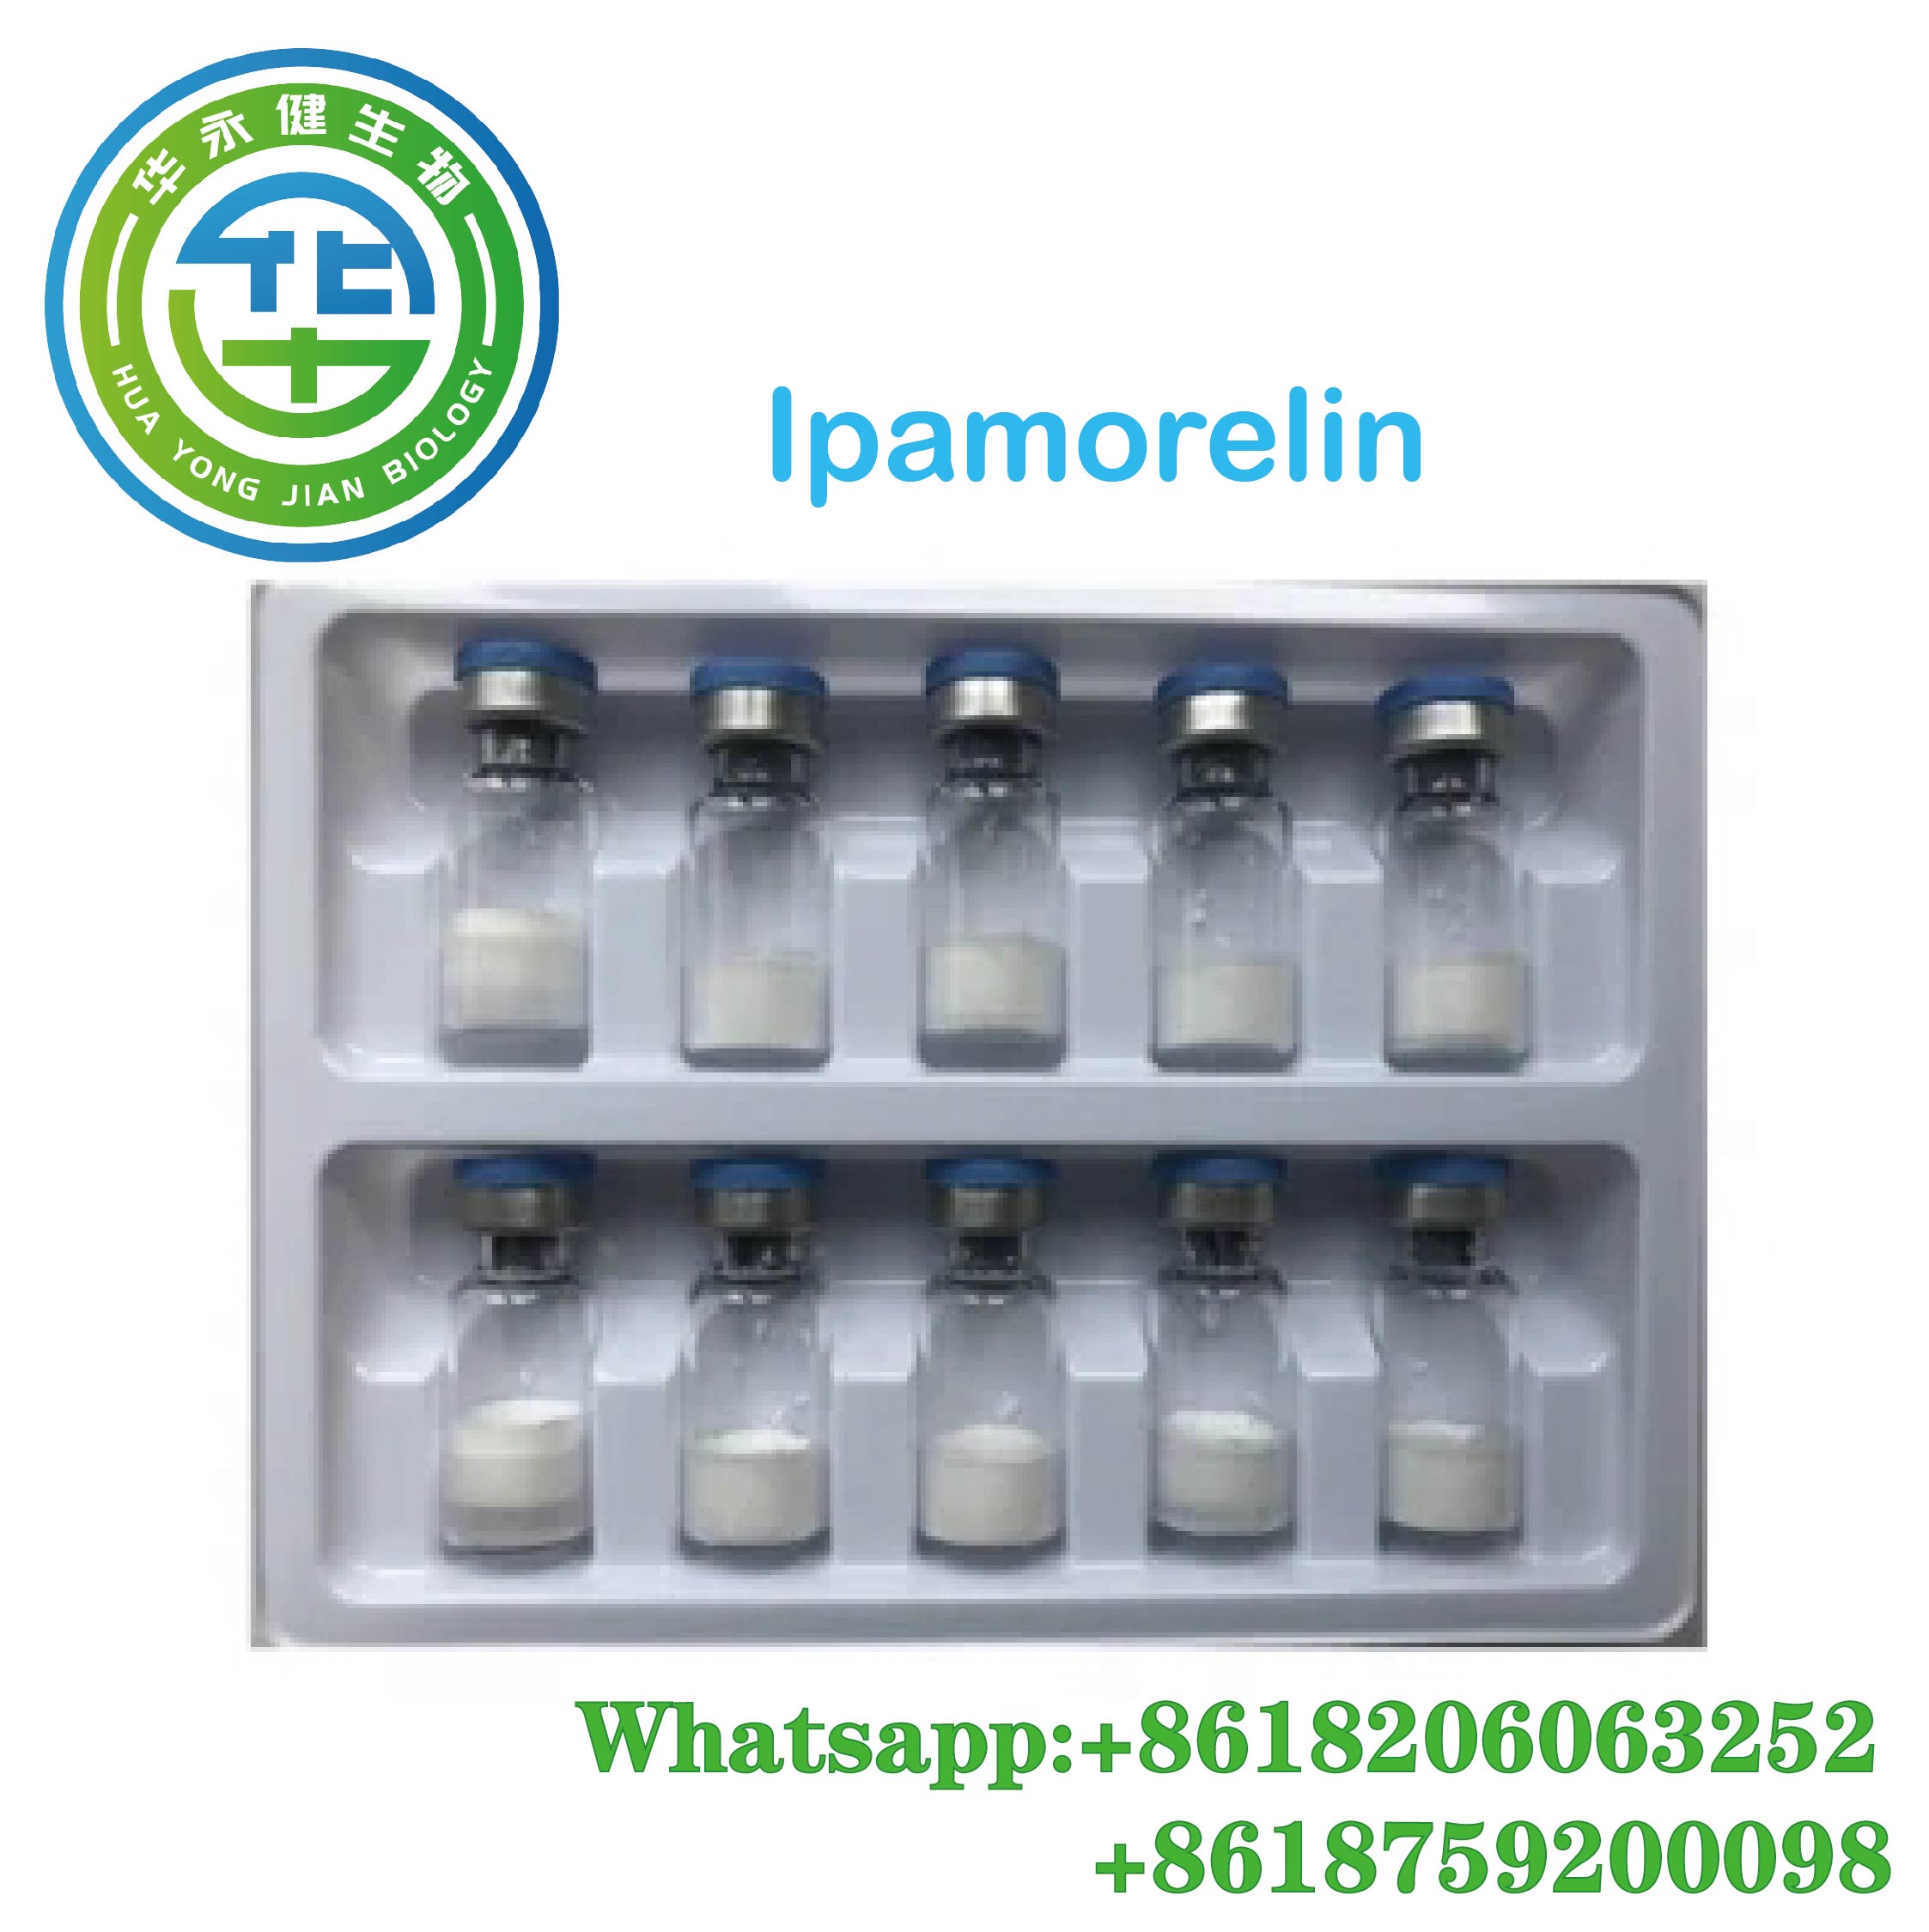 Ipamorelin 2mg /Vial Peptide Hormones For Bodybuilding Muscle Growth